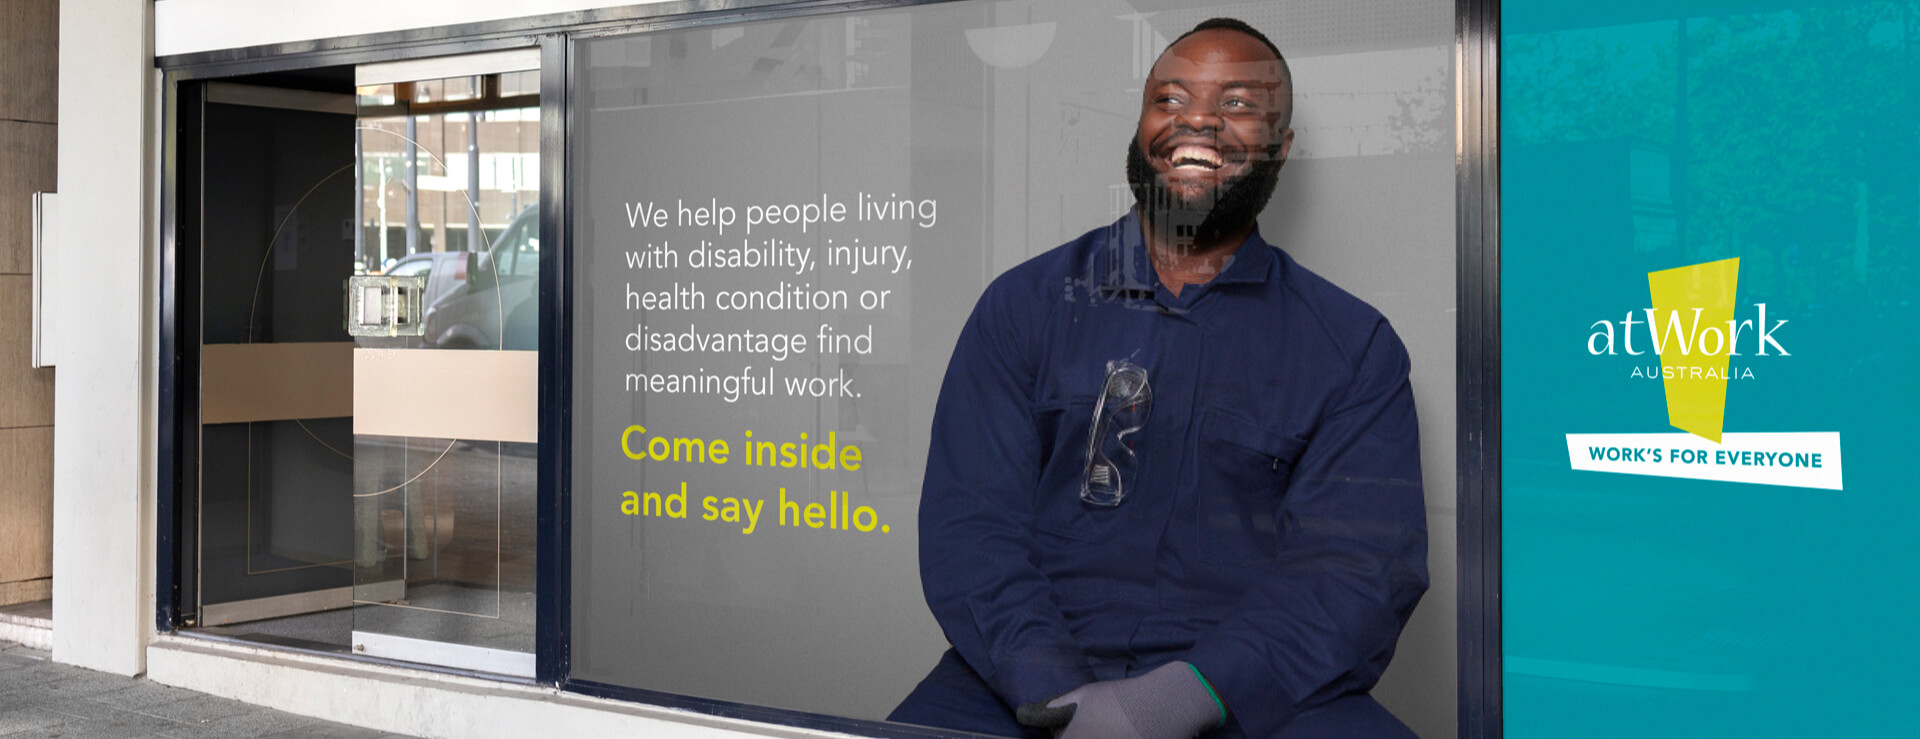 atWork Australia bus station advertisement featuring smiling man, designed by MOO Marketing & Design graphic design agency in Melbourne